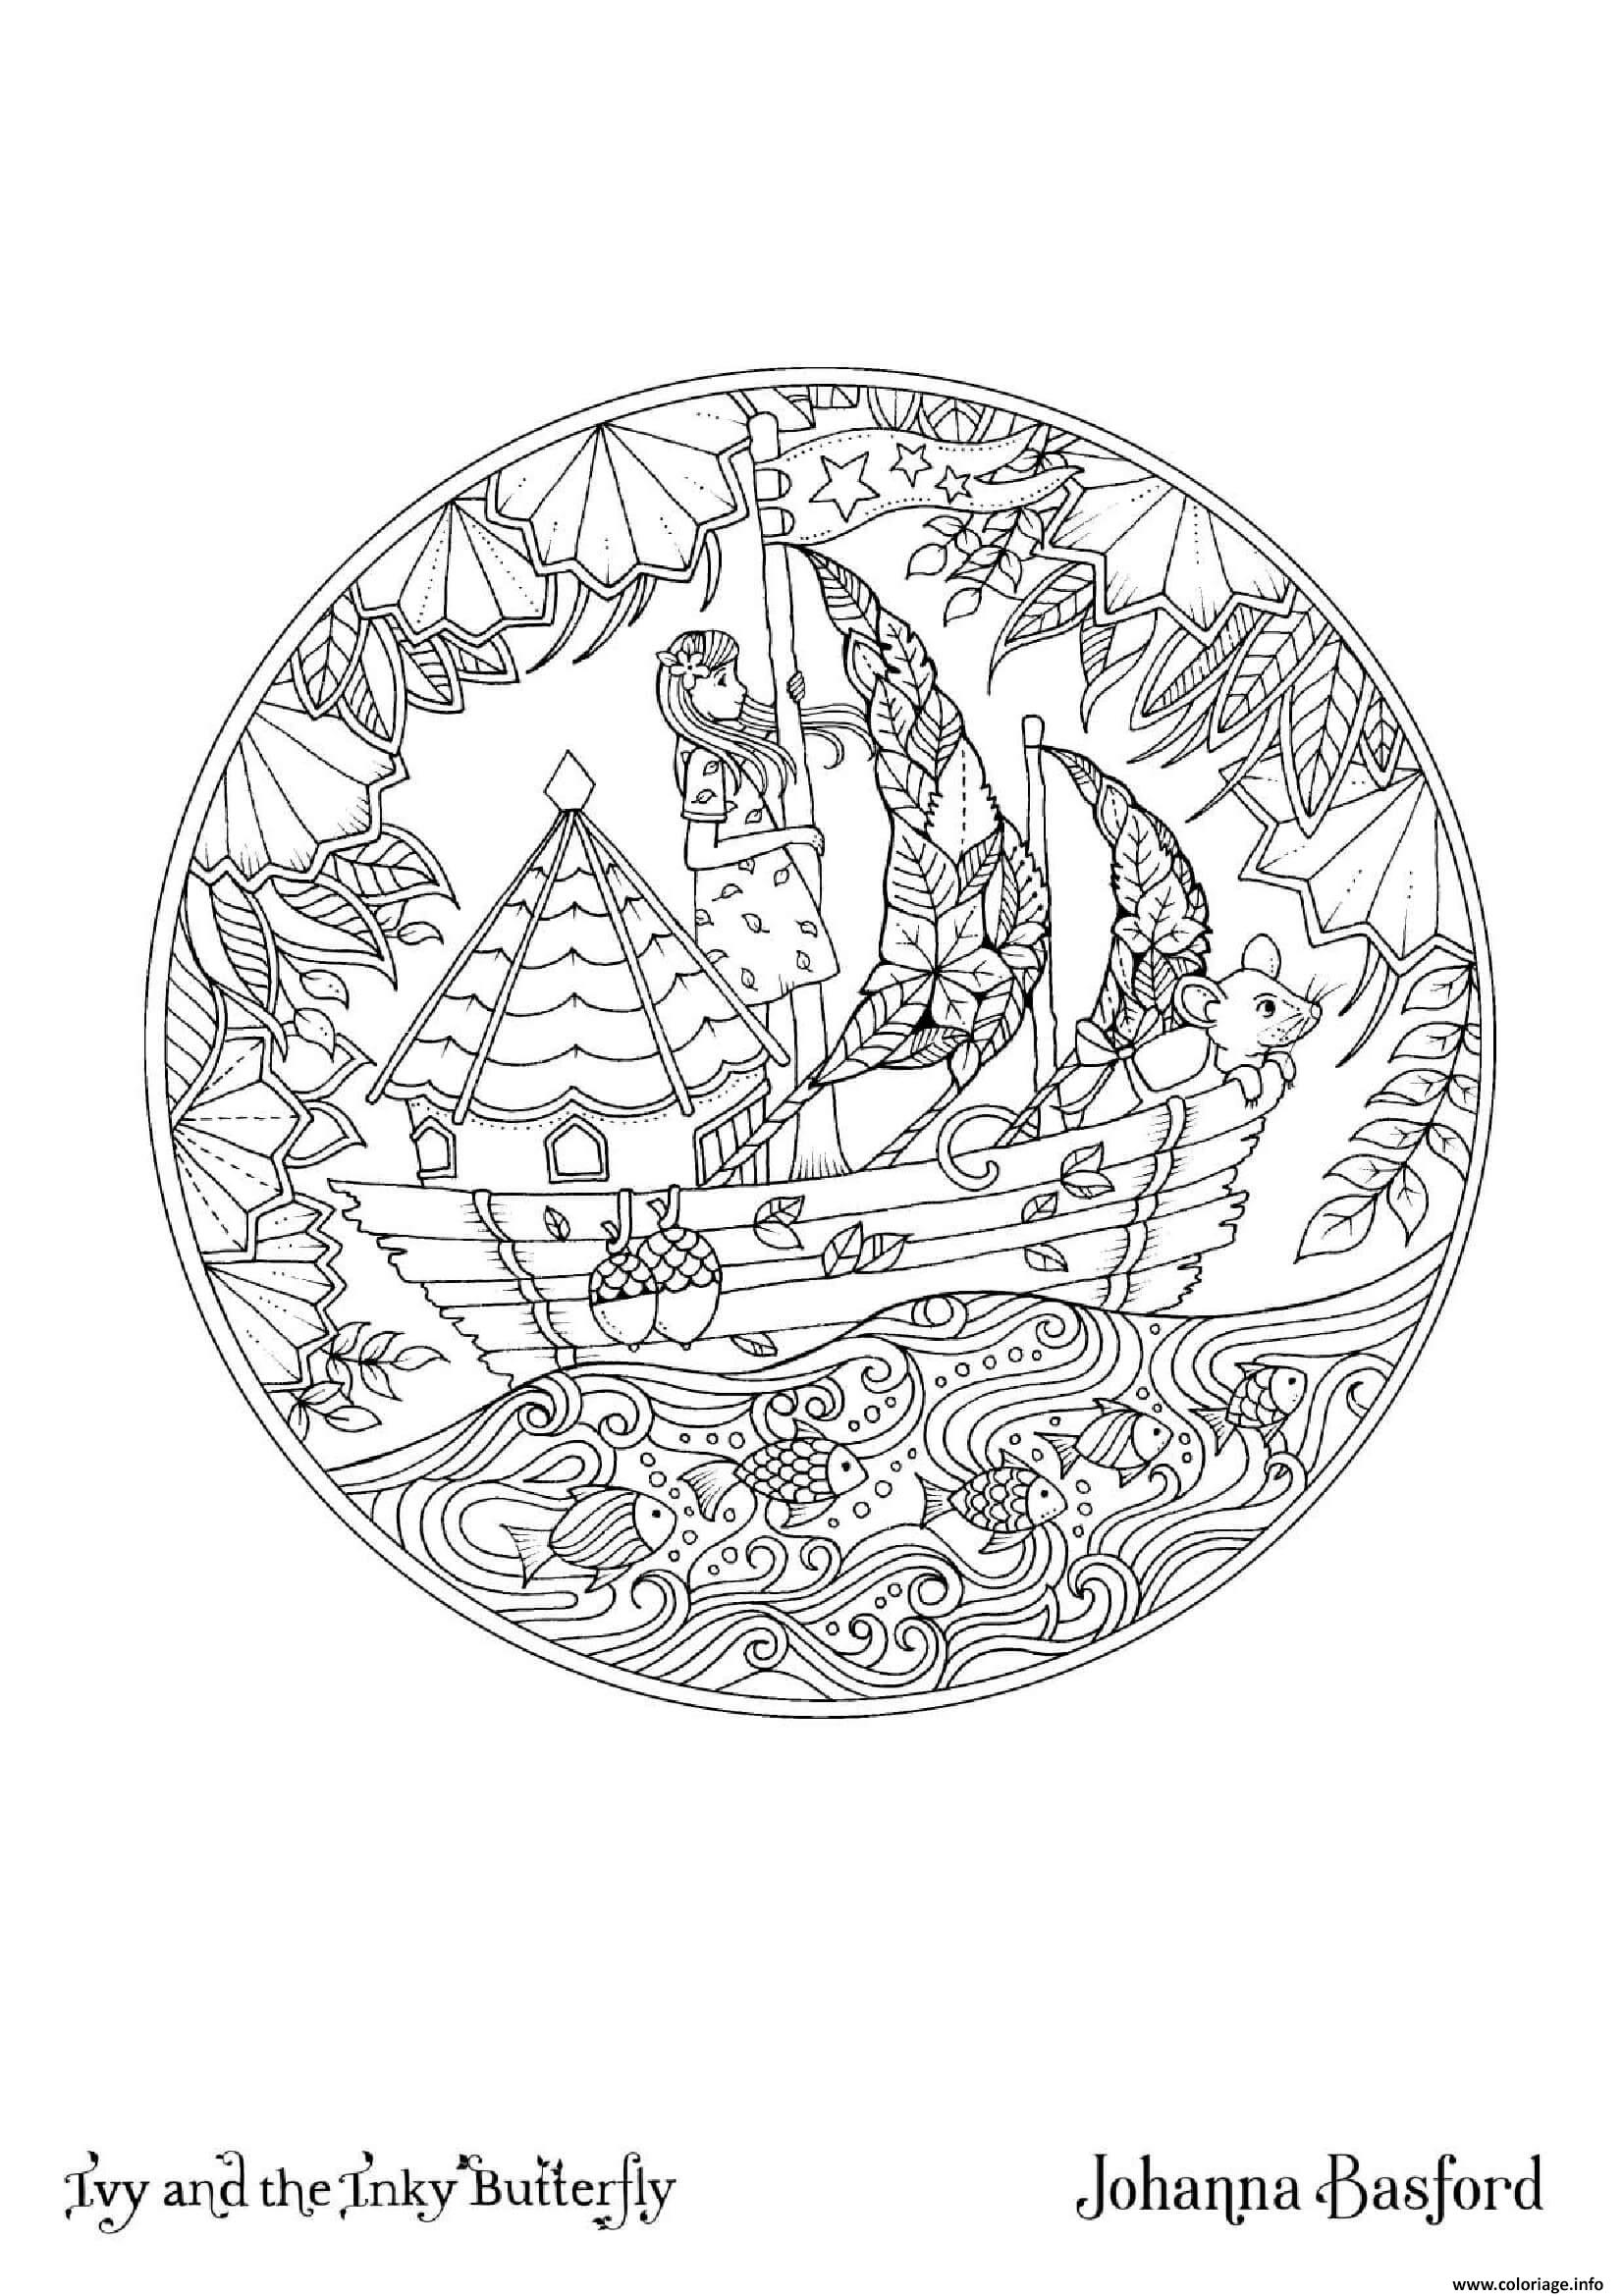 Dessin Adulte Ivy S Boat From Ivy The Inky Butterfly Coloriage Gratuit à Imprimer